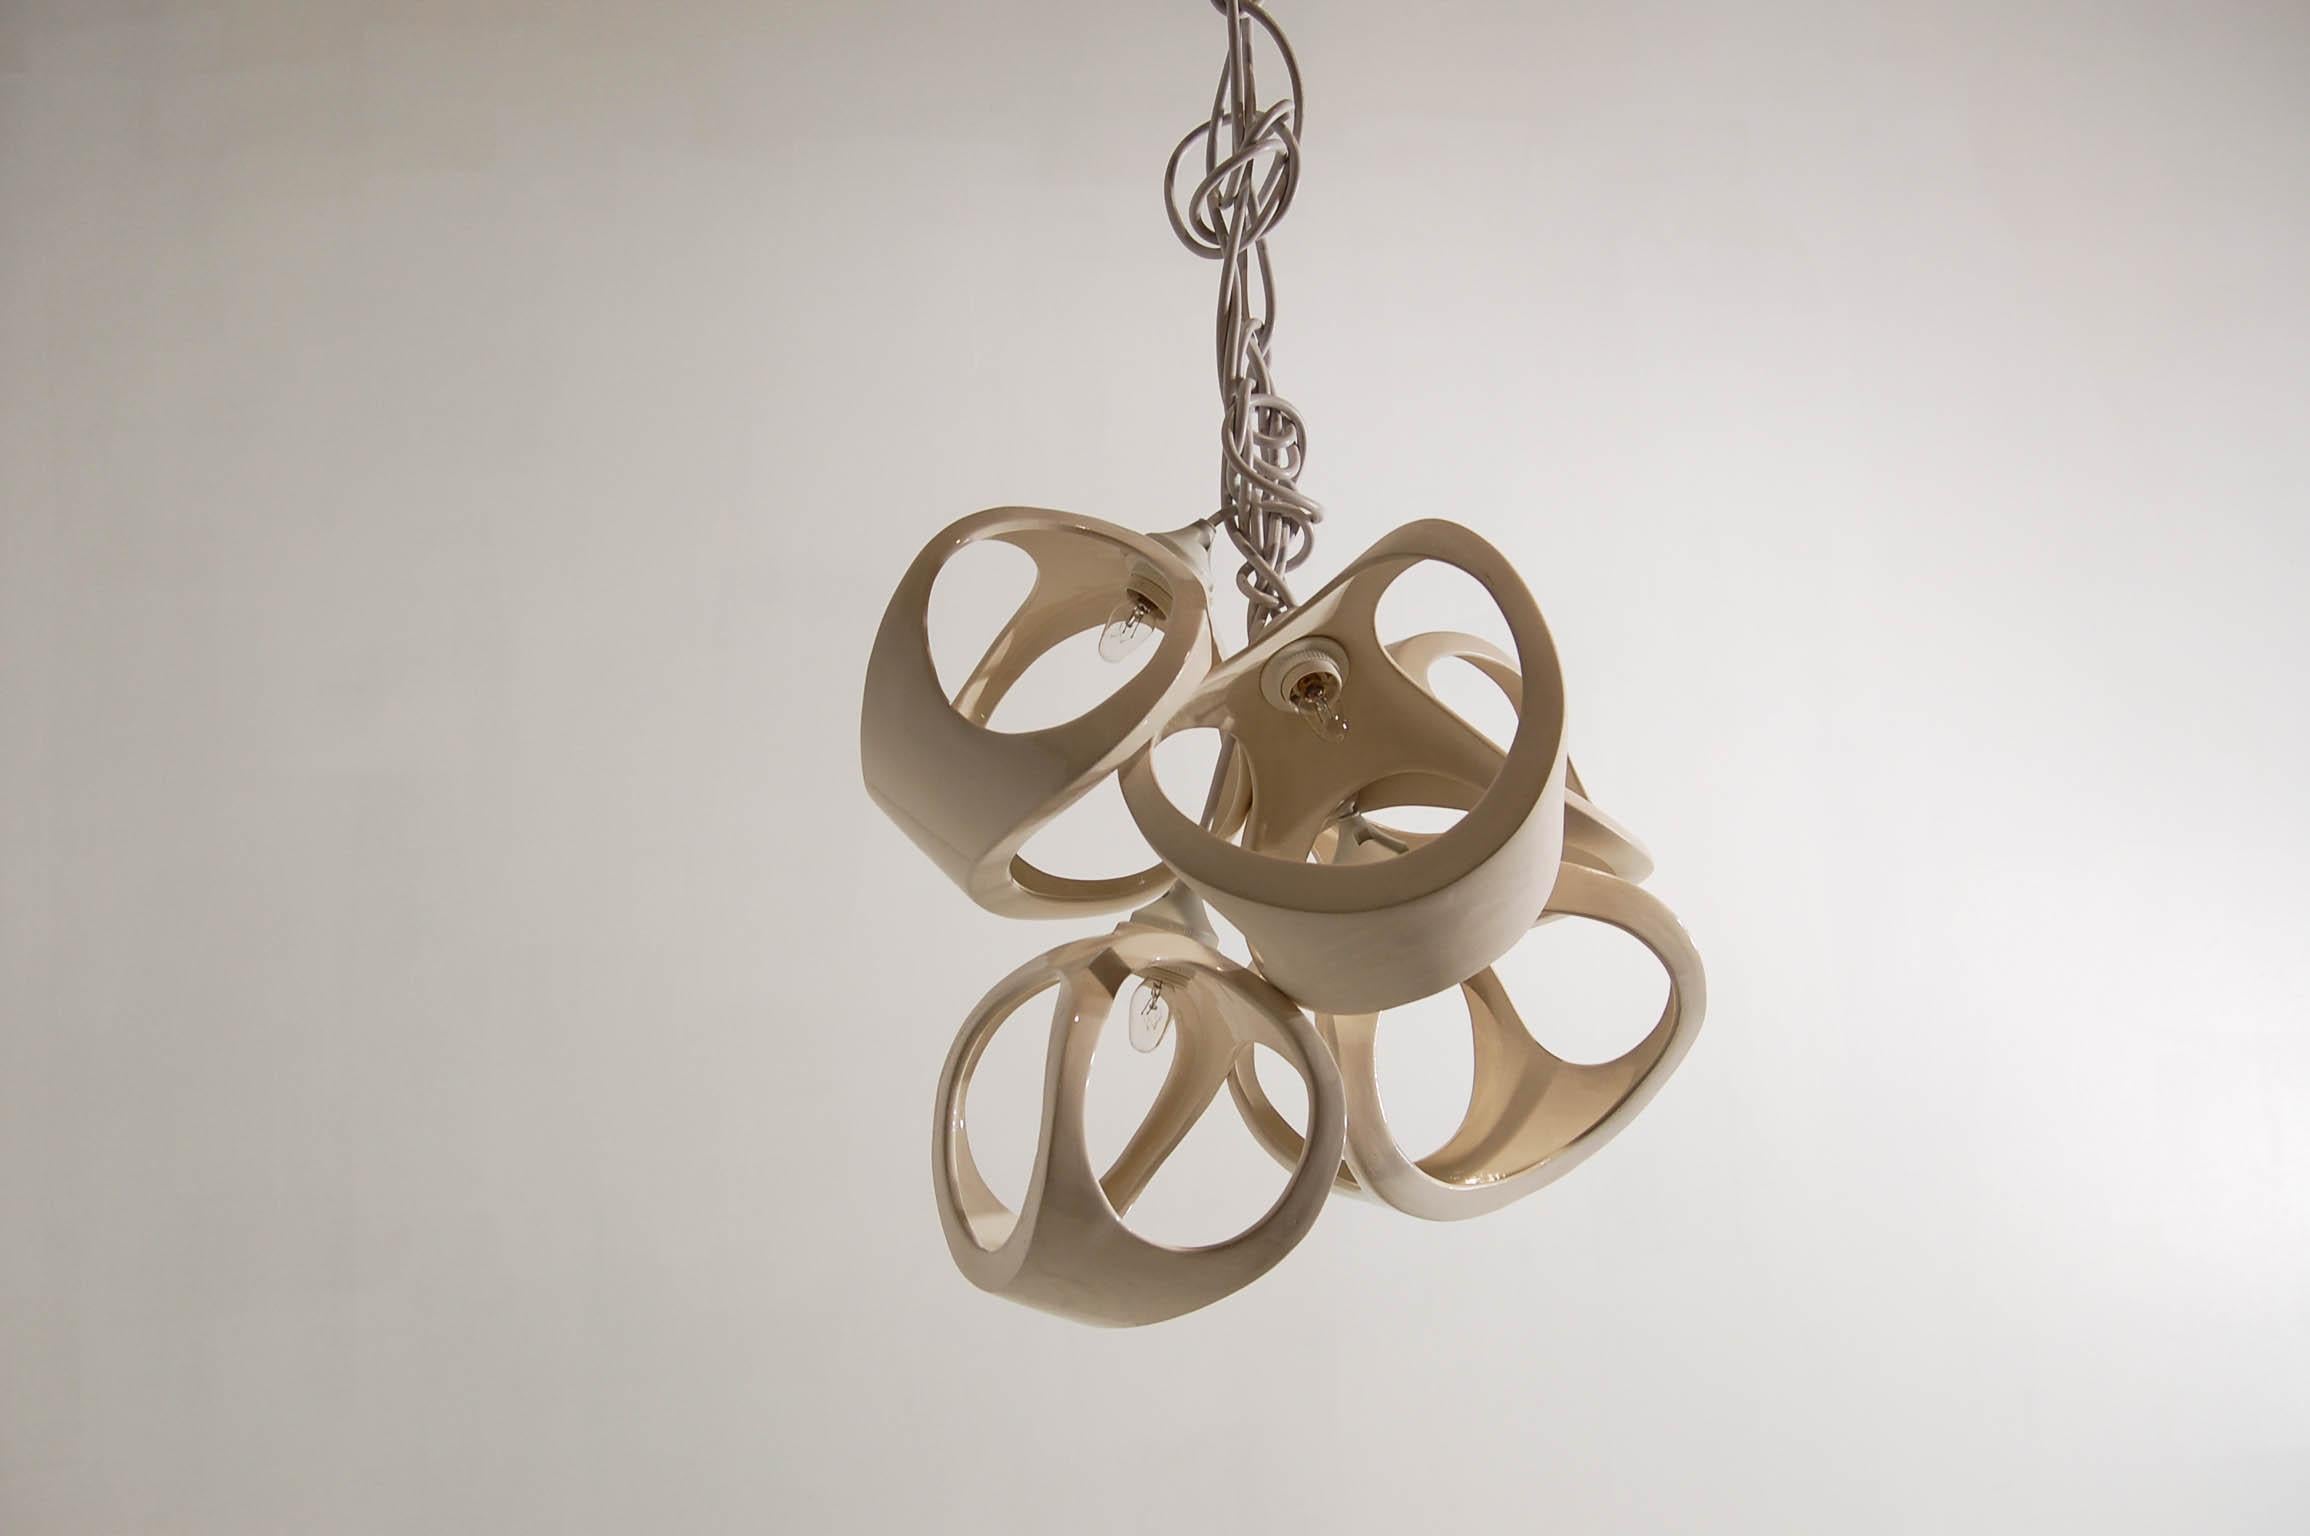 A compactly clustered ceramic lamp chandelier of 5 overlapping slip cast ceramic shades. The bone like forms nest together to form a sculptural fixture with dramatic shadows and soft light. White knotted cords accentuate the organic nature of the